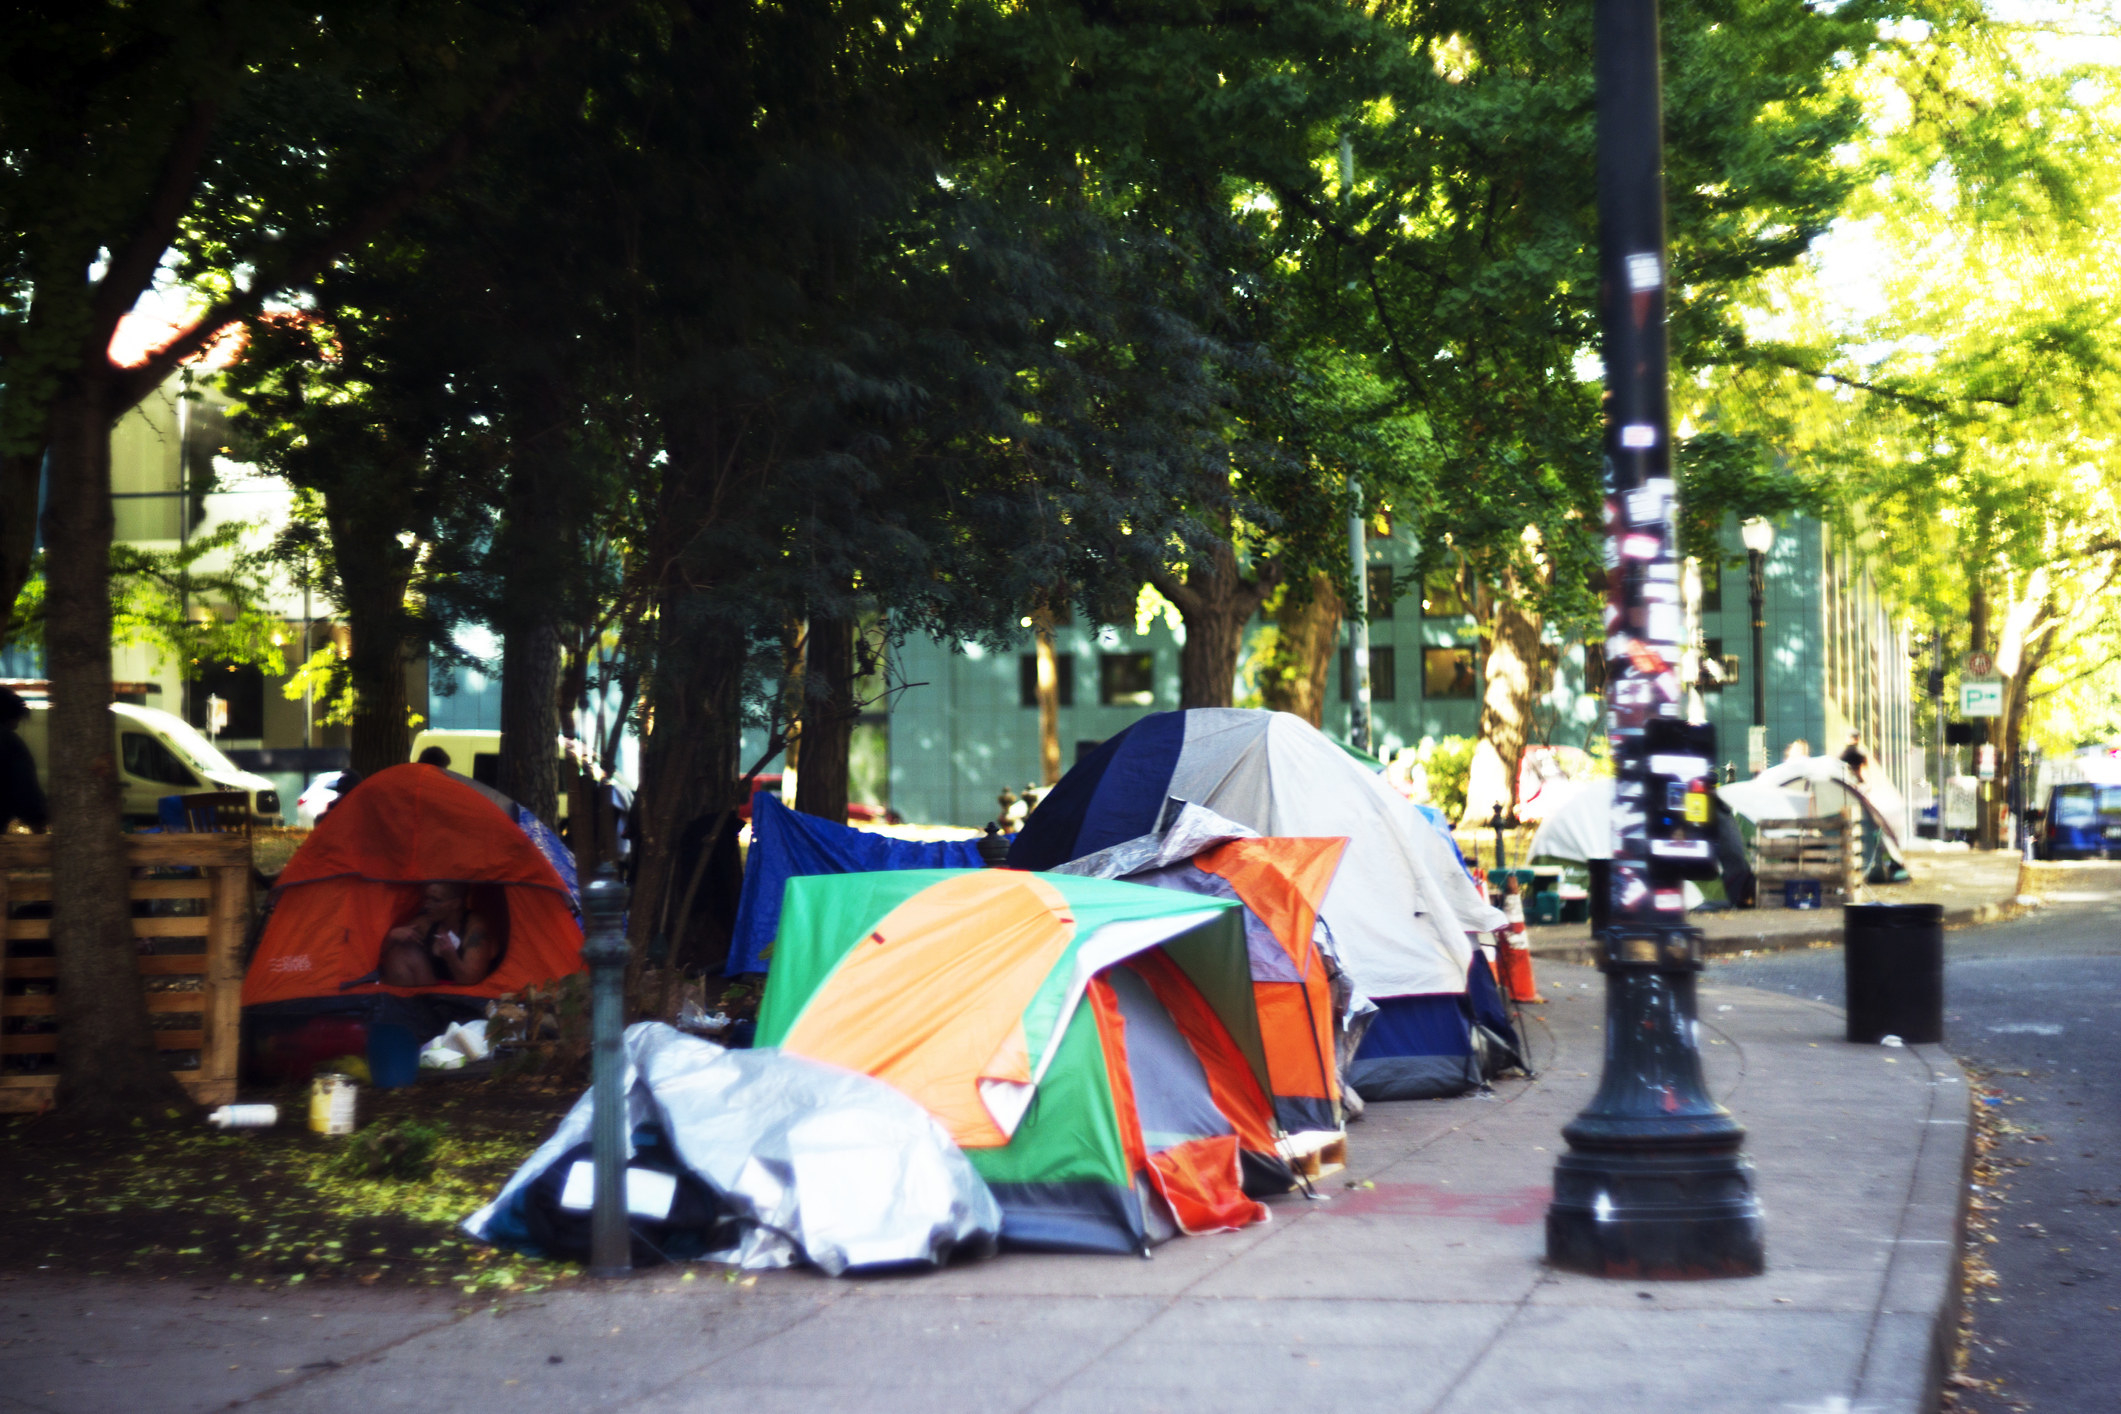 Unhoused people&#x27;s tents on the street